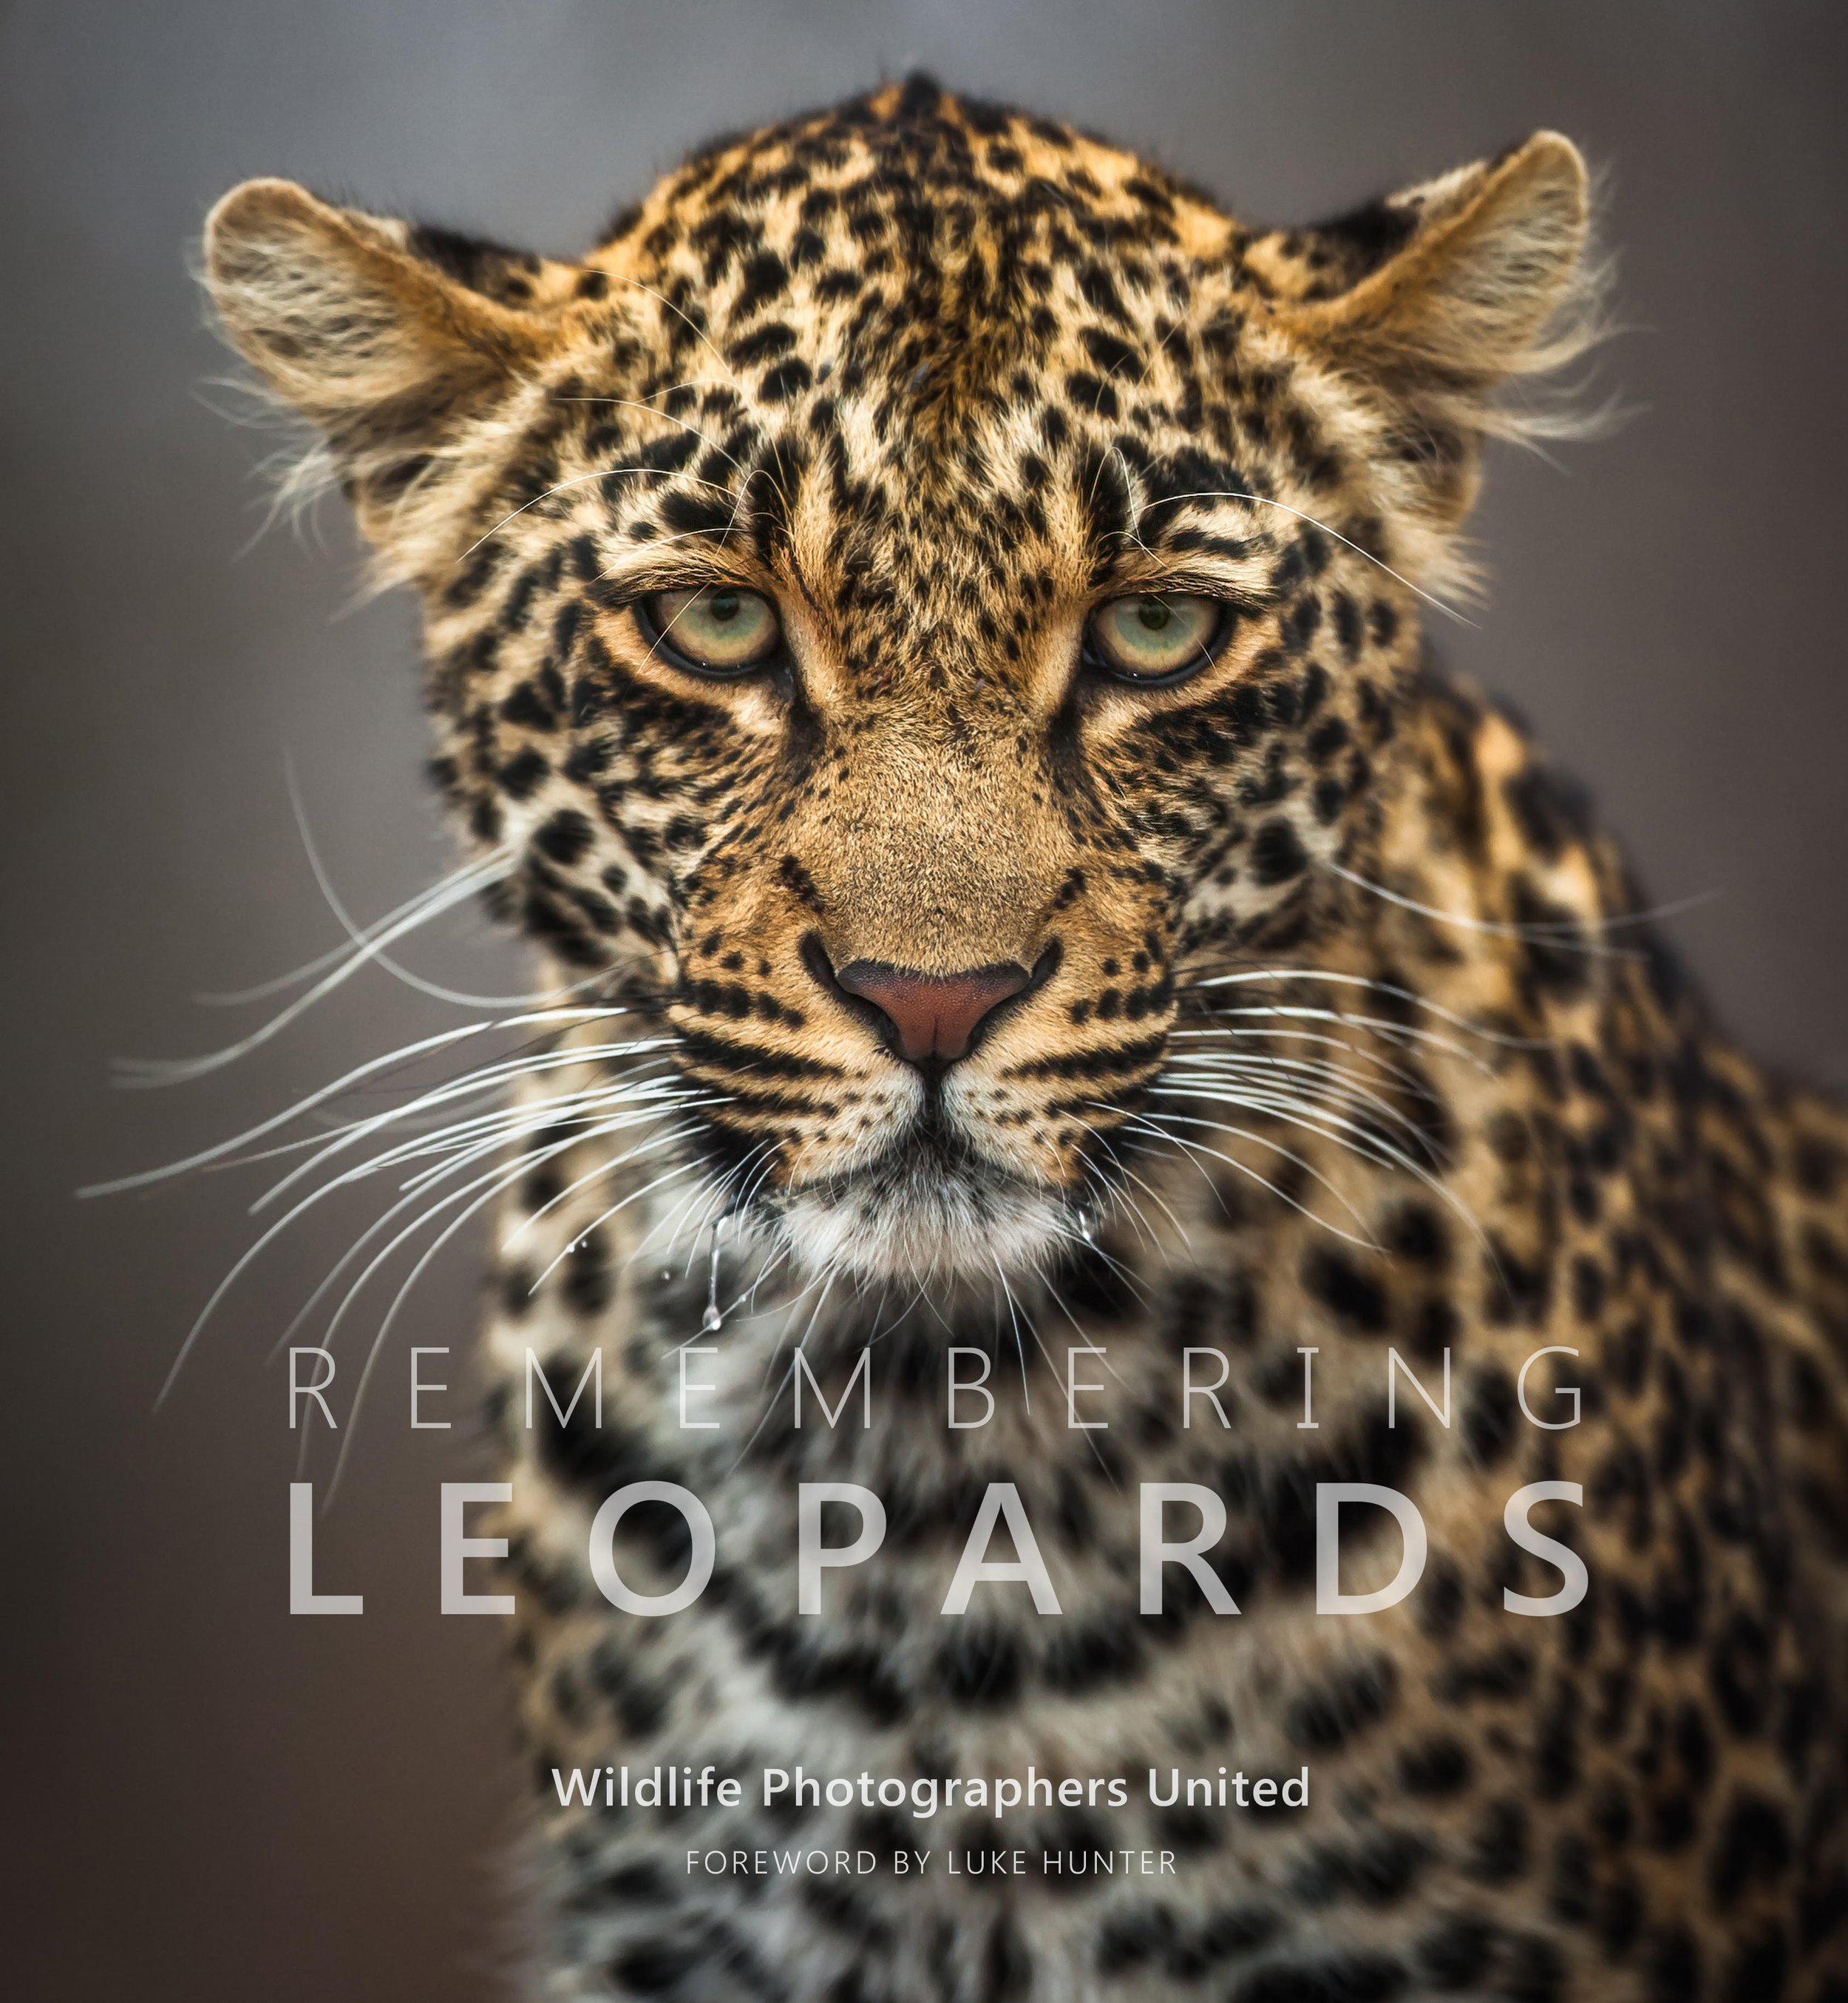 Remembering Leopards is the stunning eighth book in the Remembering Wildlife charity series